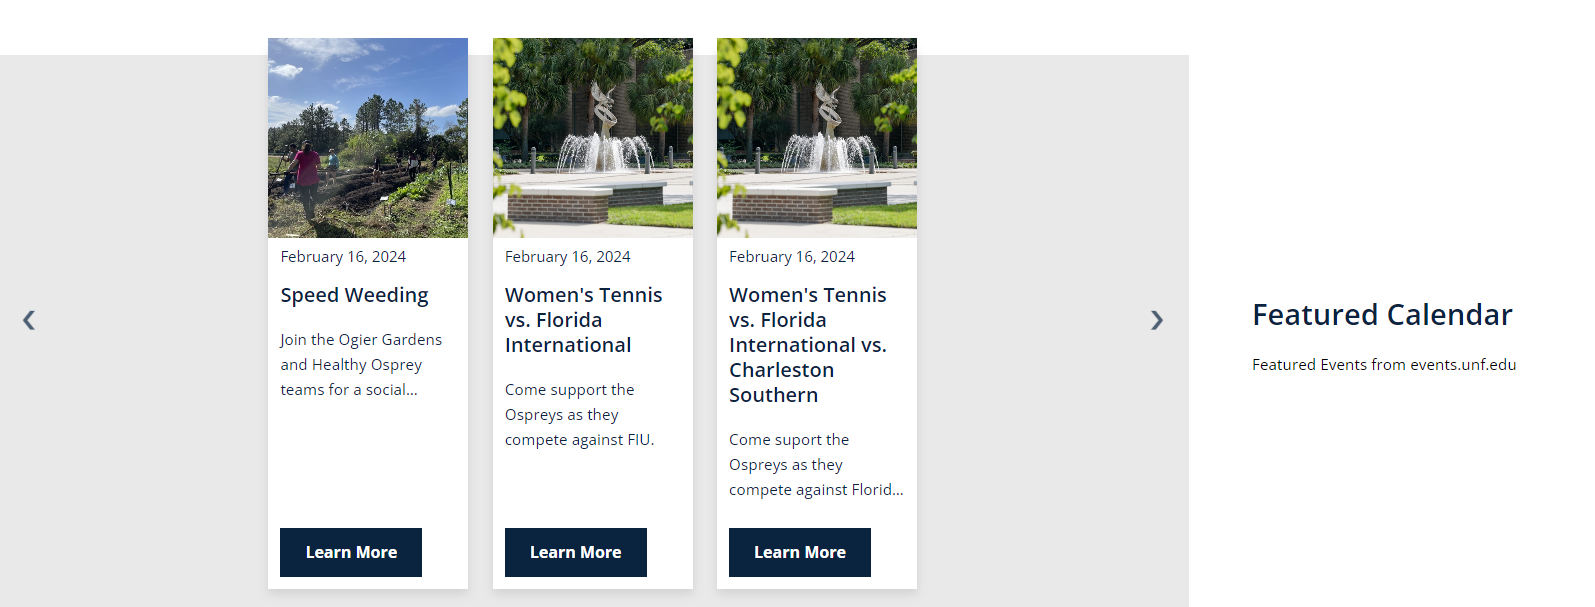 Featured Calendar slider showing three events speed weeding and two women's tennis matches